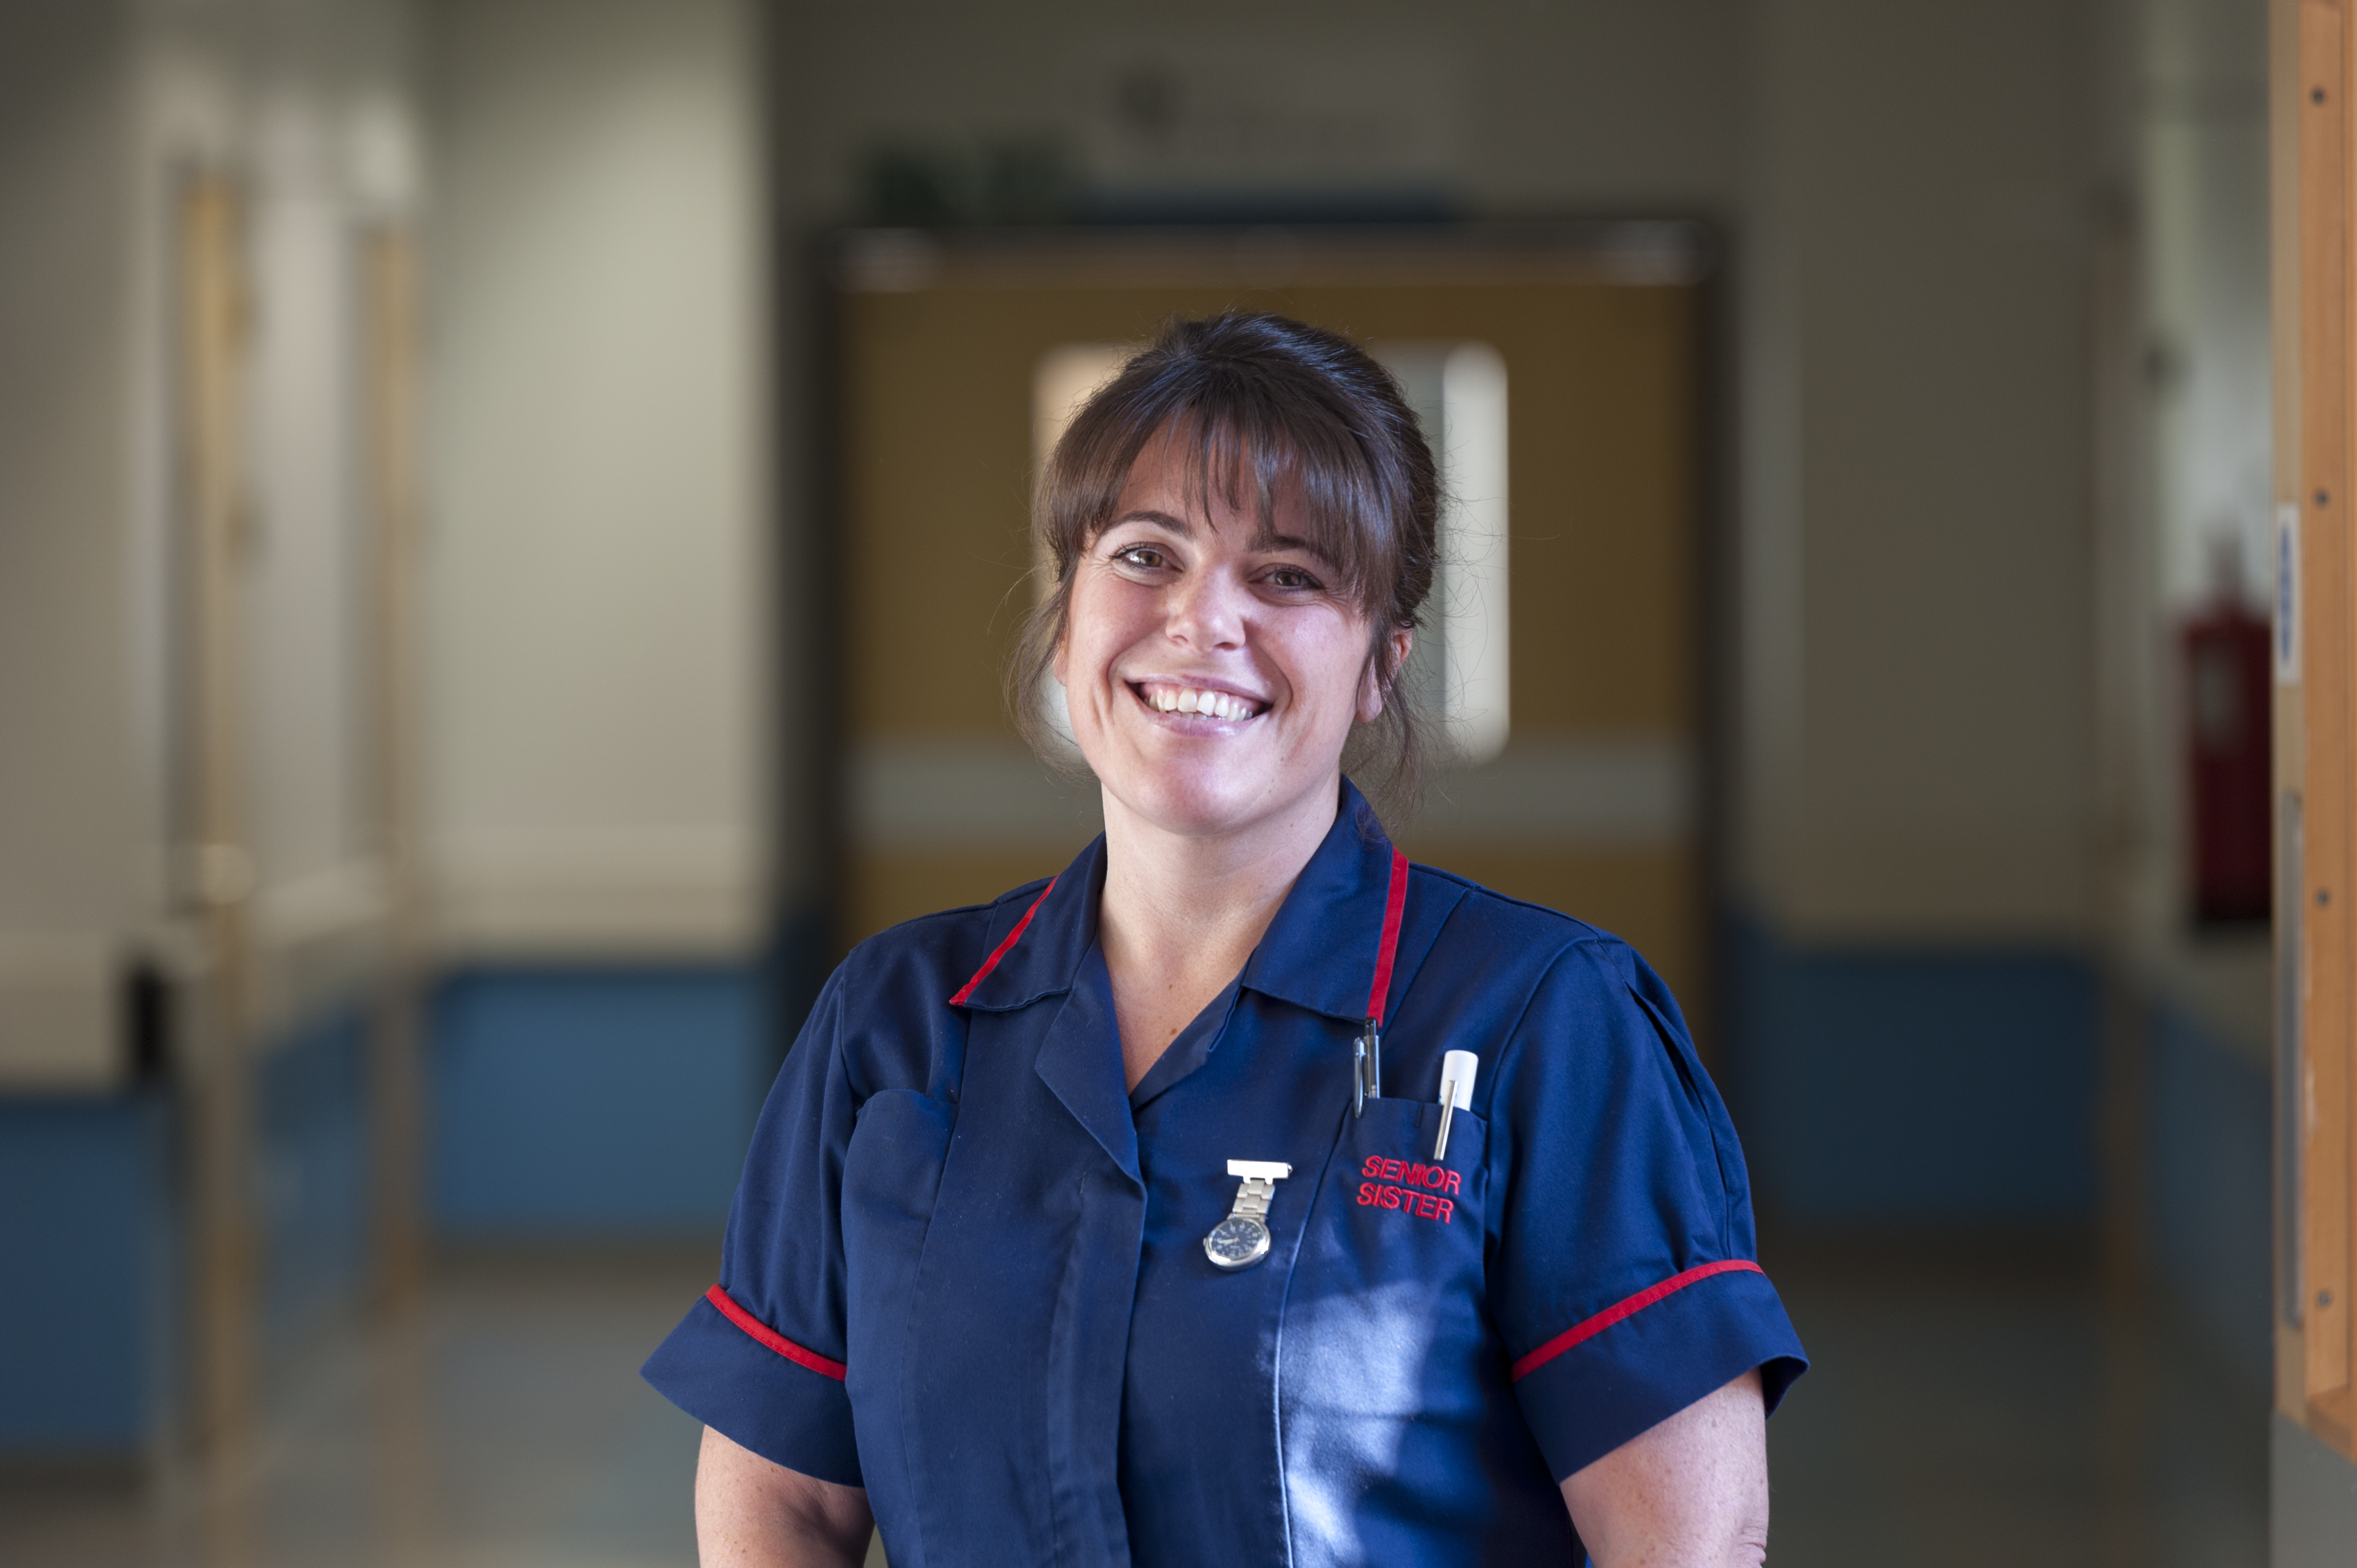 Recruitment open evening at Southport hospital for nurses